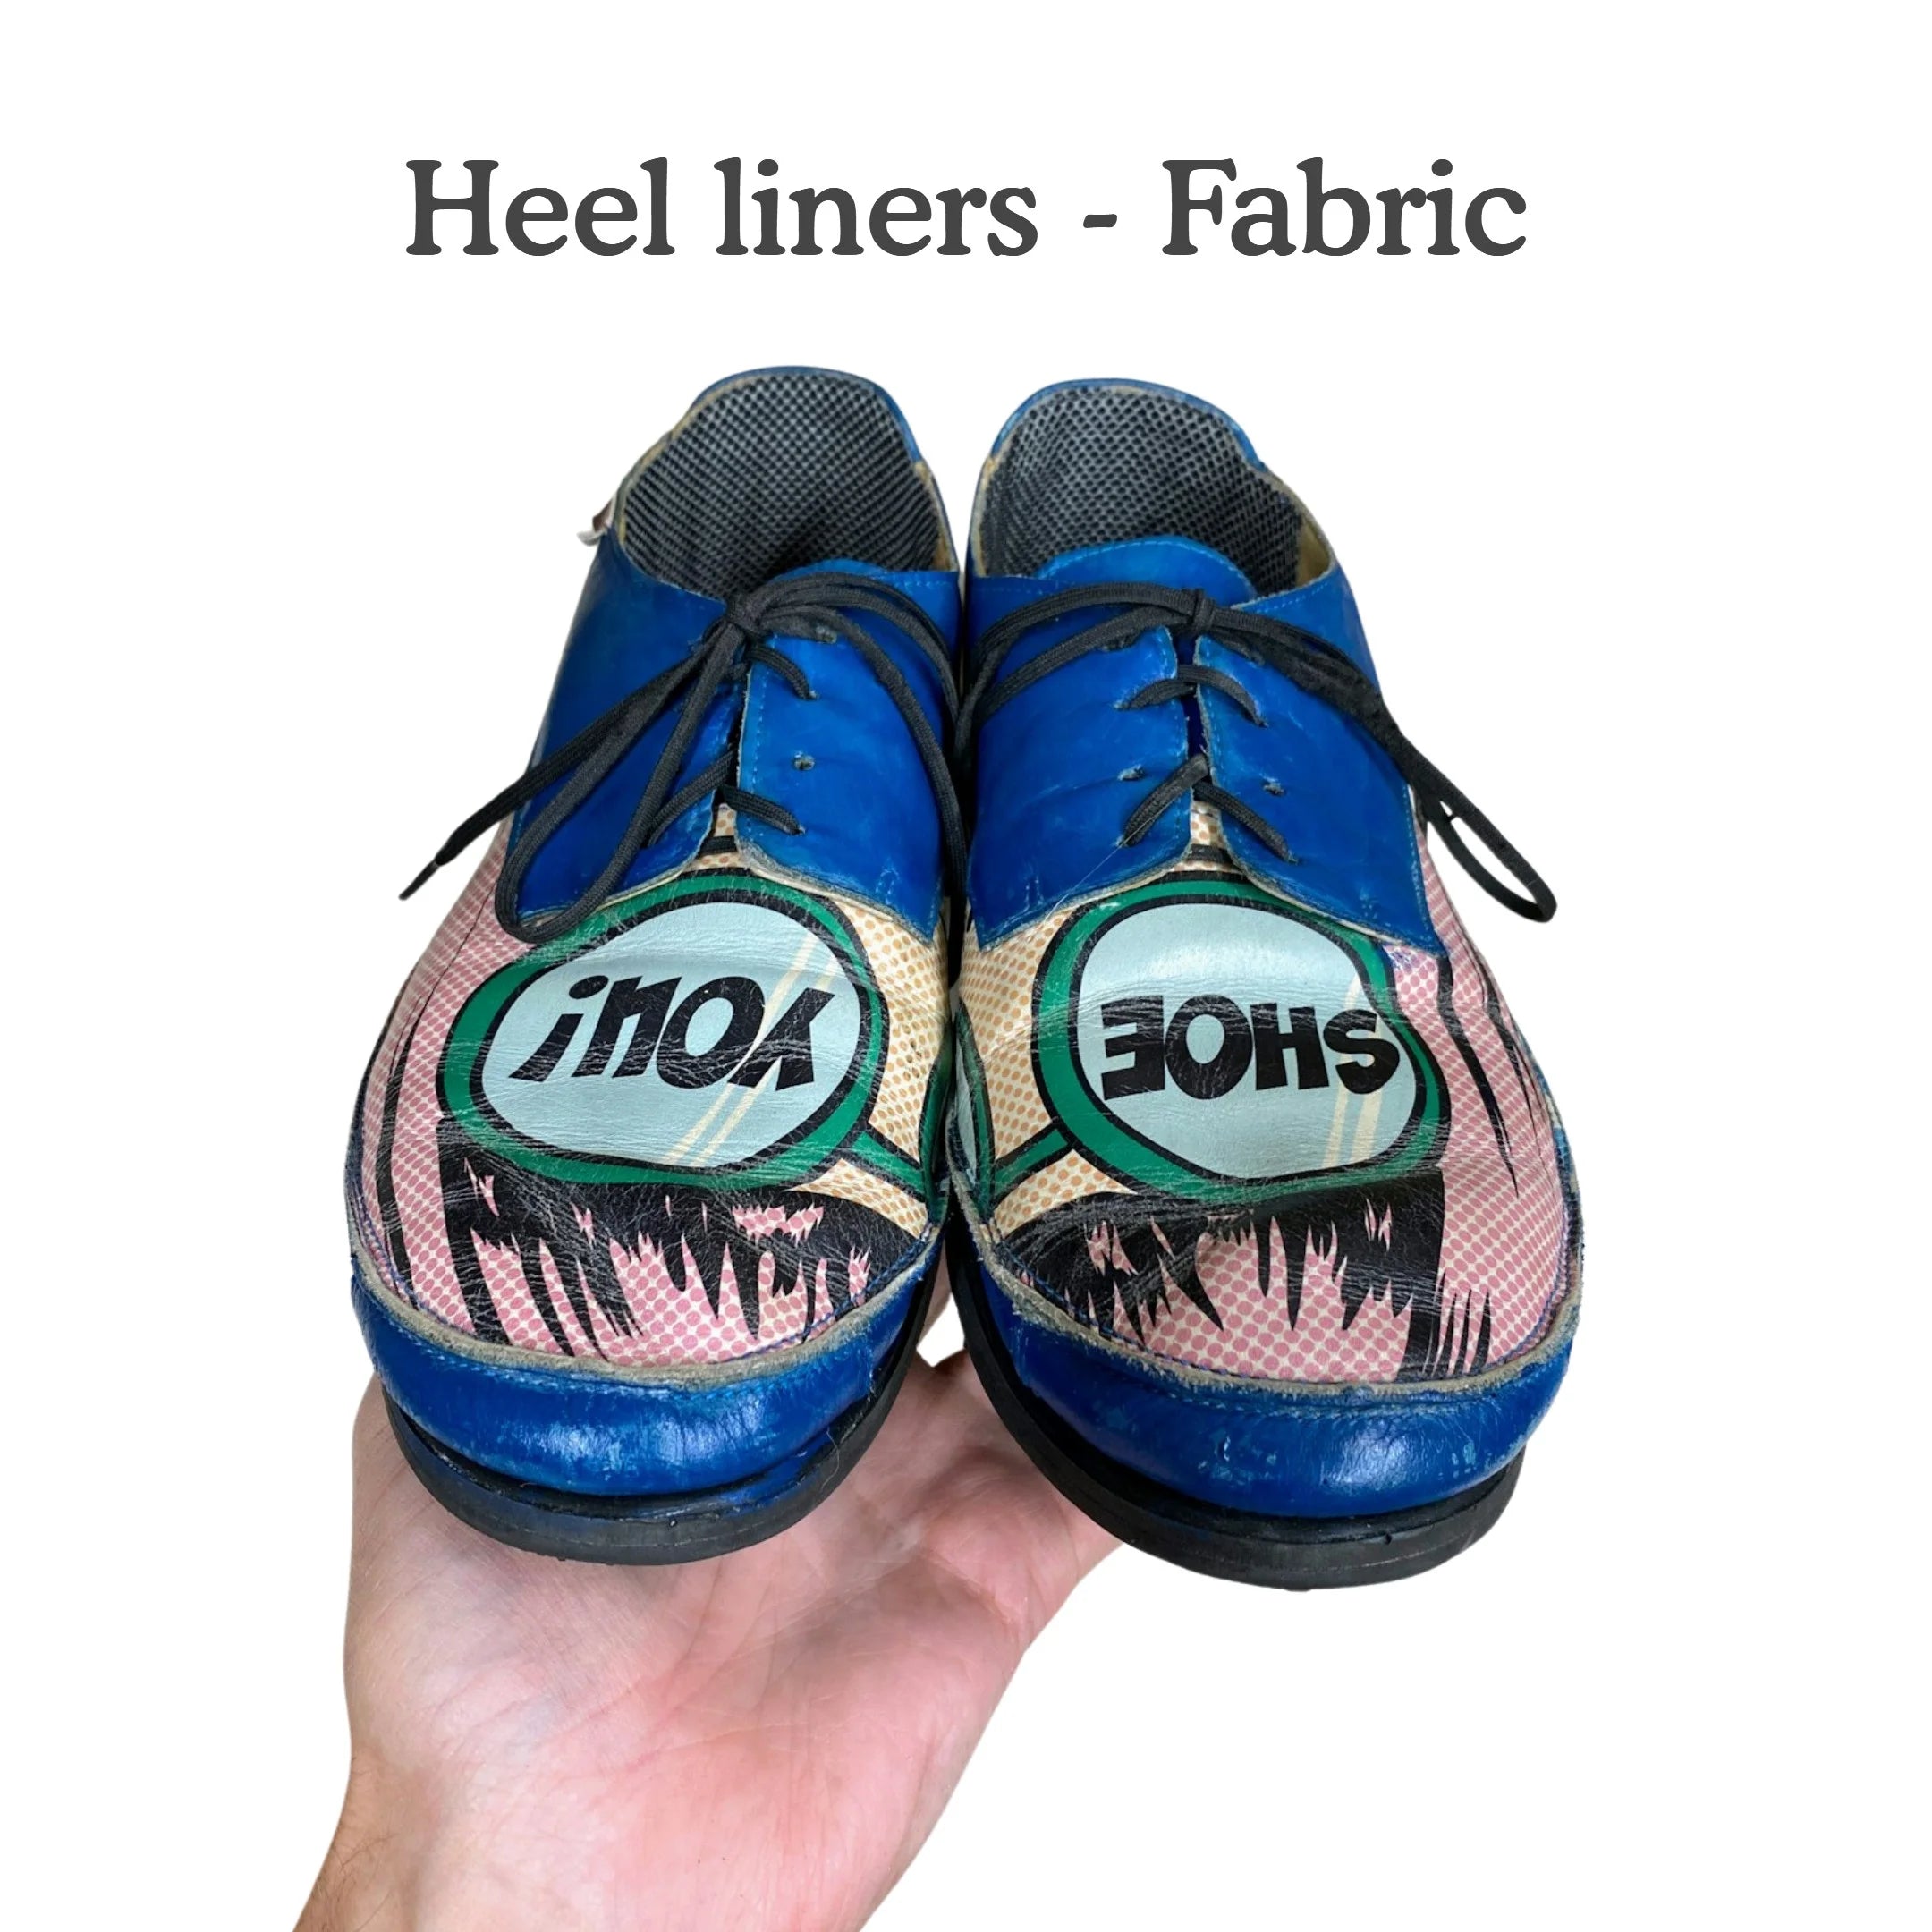 heel-liners-fabric-leather-blue-shoes